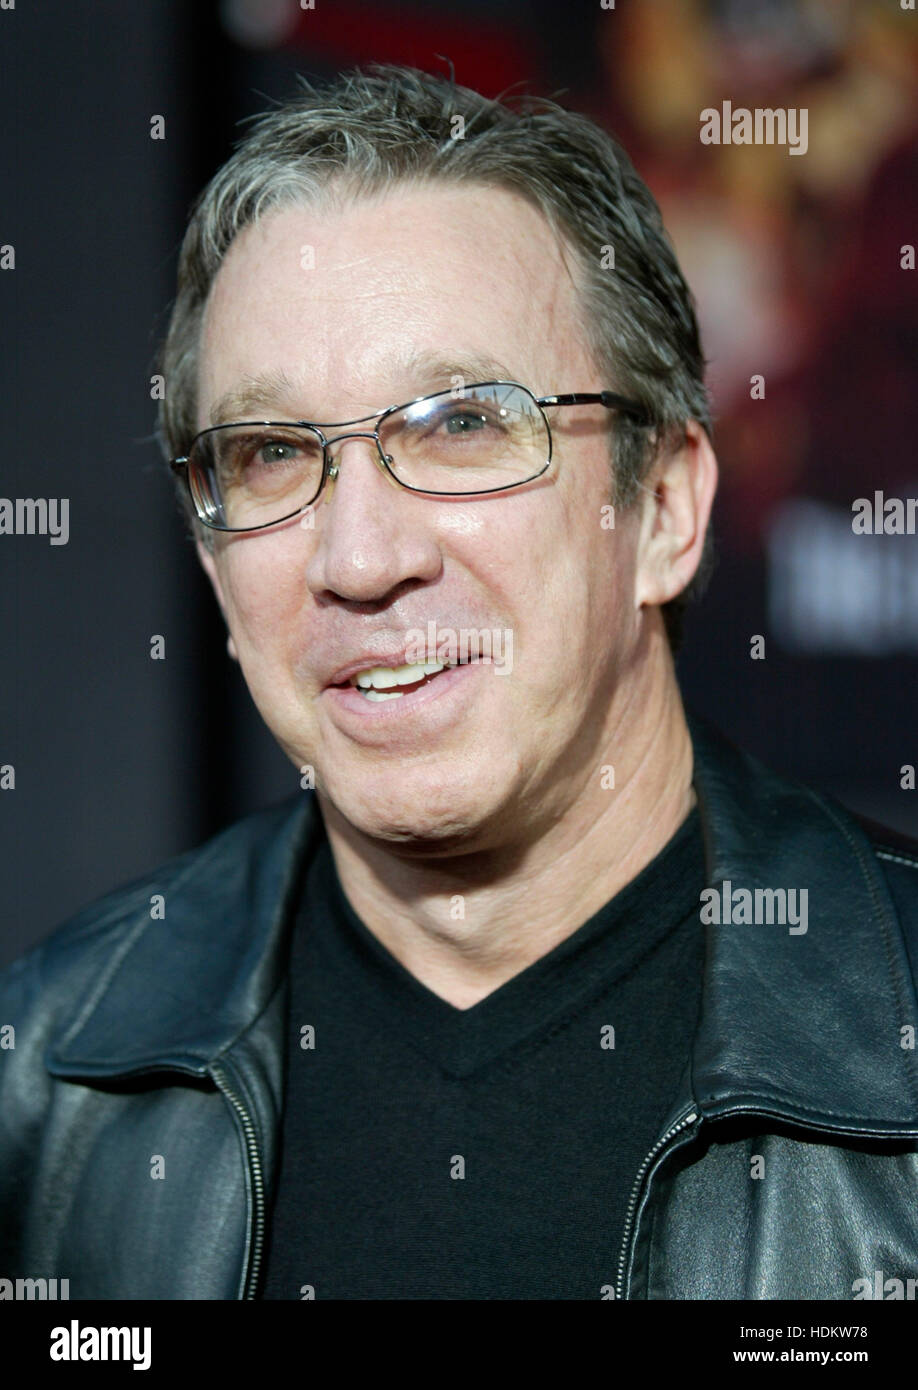 Actor Tim Allen, a guest at the premiere of the new animated film from Pixar, 'The Incredibles'  poses for photographers at the El Capitan Theatre in Los Angeles,  October 24, 2004. The film opens in the United States November 5th. Photo by Francis Specker Stock Photo